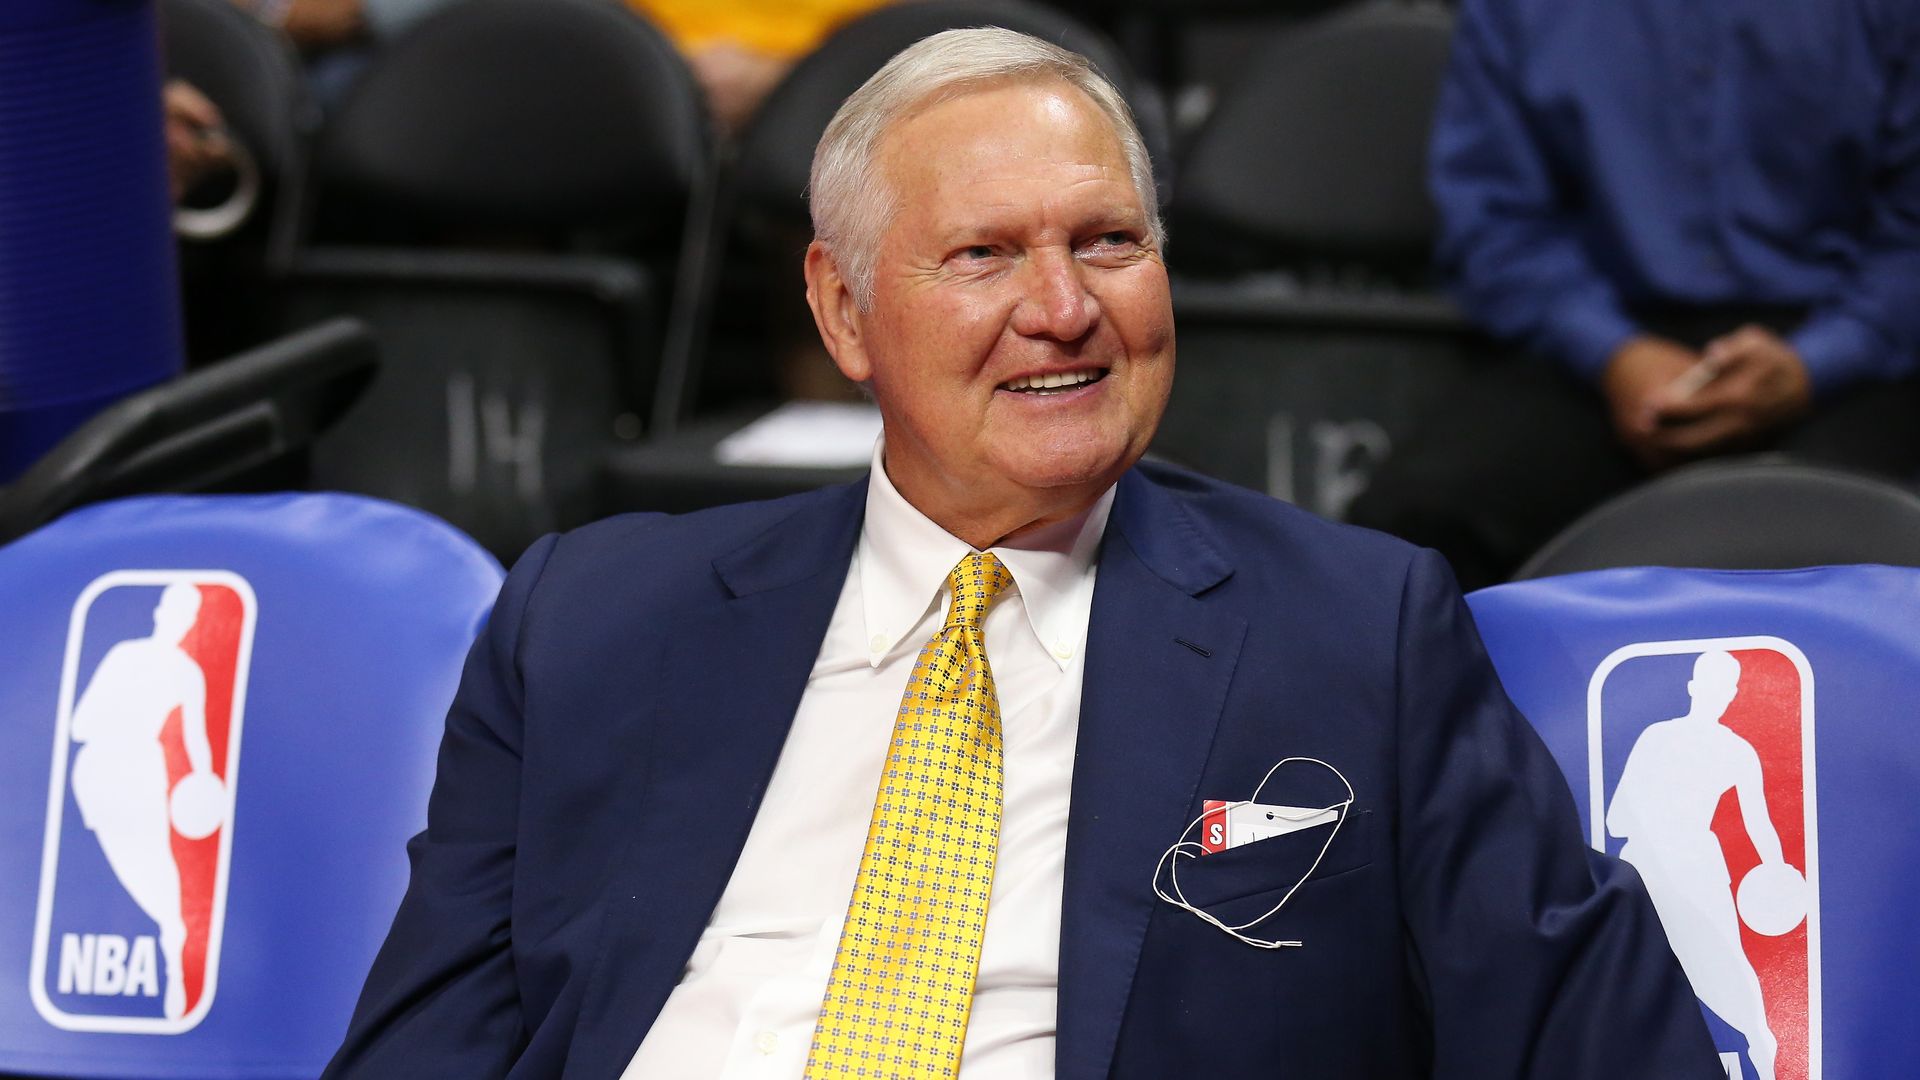  Golden State Warriors executive board member Jerry West sits on the bench by NBA logos before the game the Los Angeles Clippers at Staples Center on March 31, 2015.